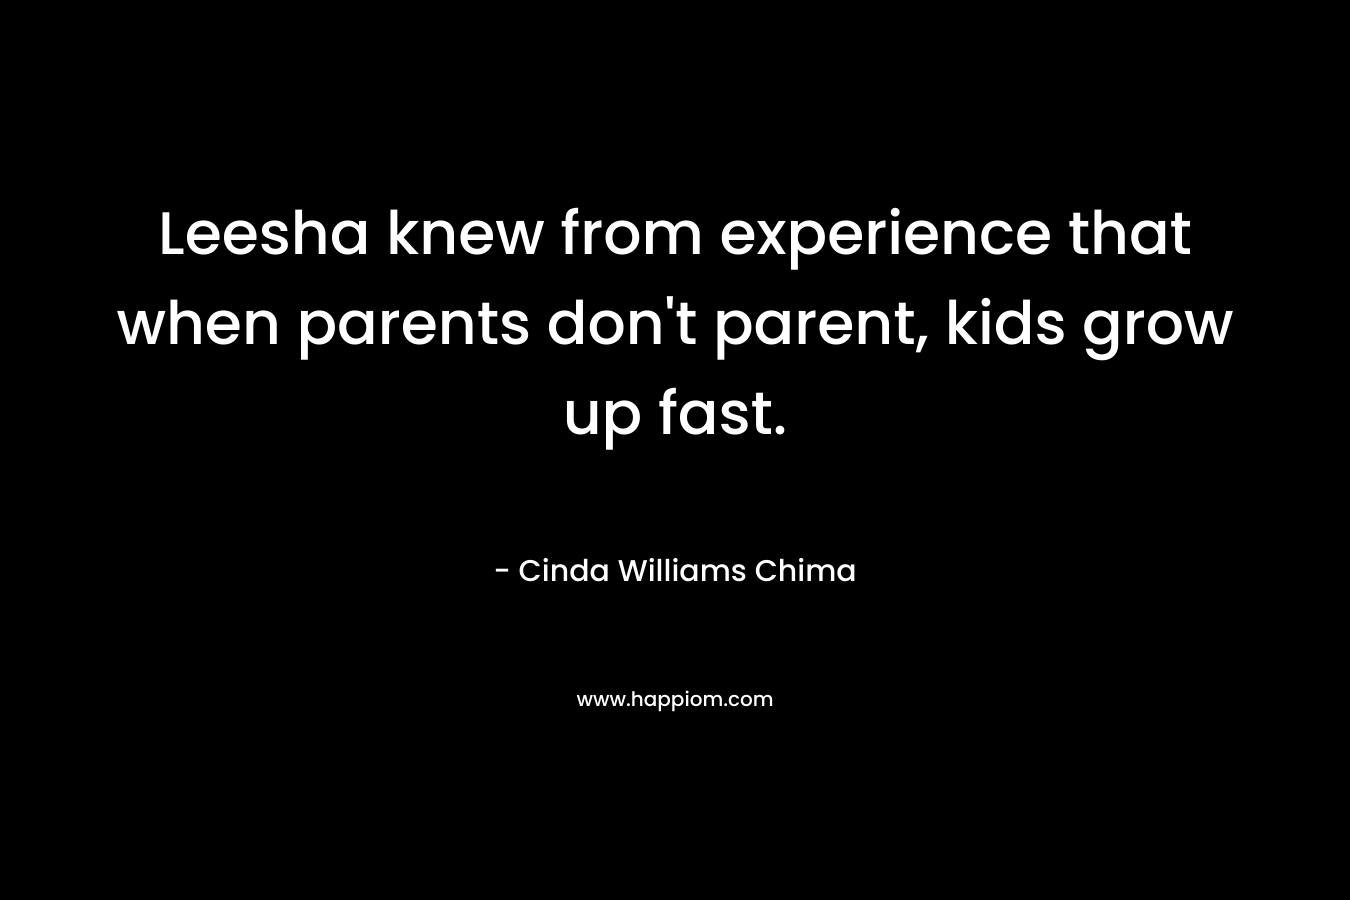 Leesha knew from experience that when parents don’t parent, kids grow up fast. – Cinda Williams Chima